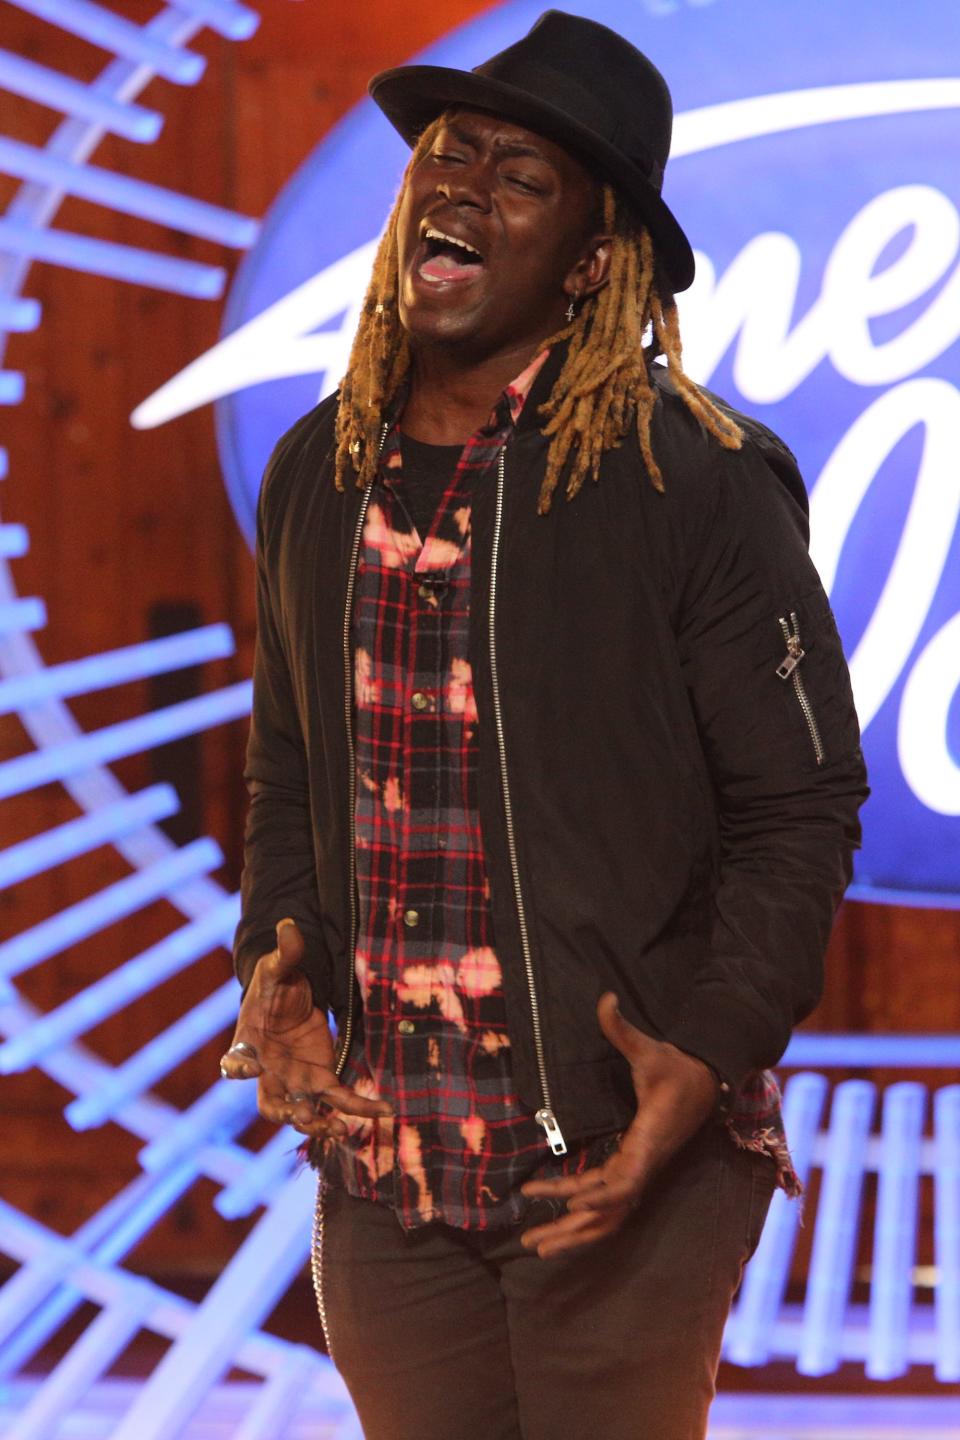 "American Idol" hopeful Jovin Webb wowed the judges with his haunting audition performance of The Allman Brothers Band's “Whipping Post.”